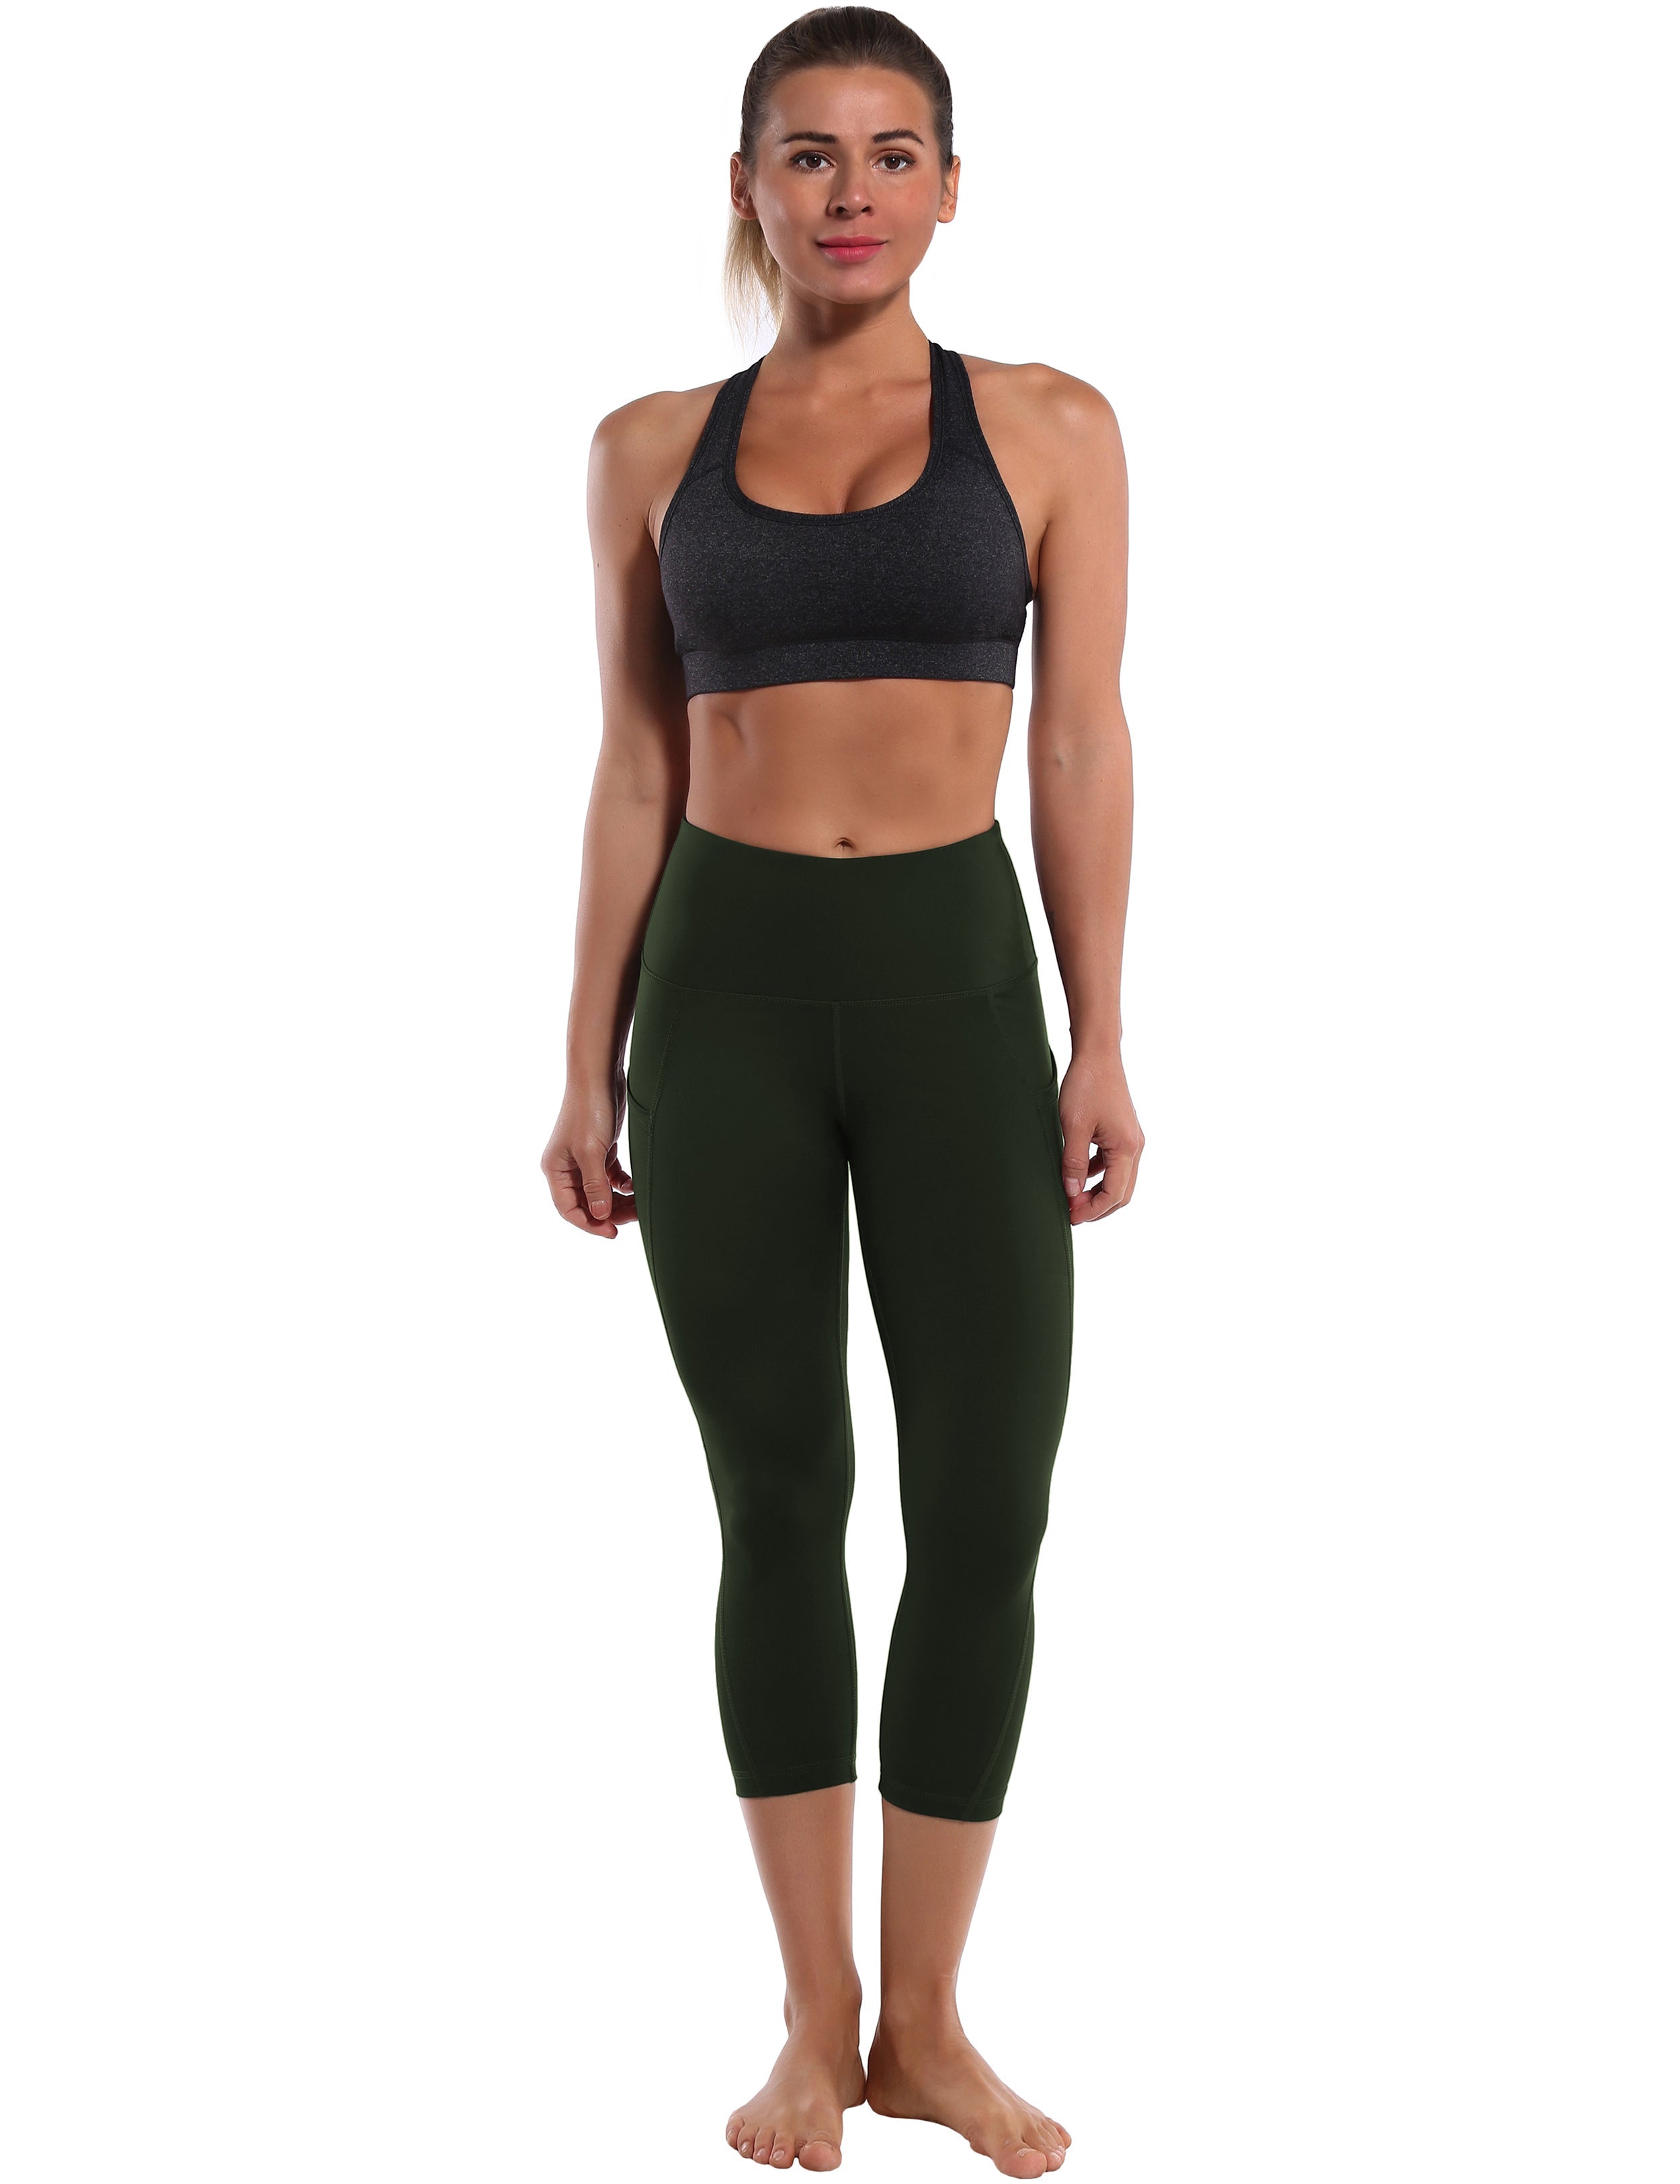 19" High Waist Side Pockets Capris olivegray 75%Nylon/25%Spandex Fabric doesn't attract lint easily 4-way stretch No see-through Moisture-wicking Tummy control Inner pocket